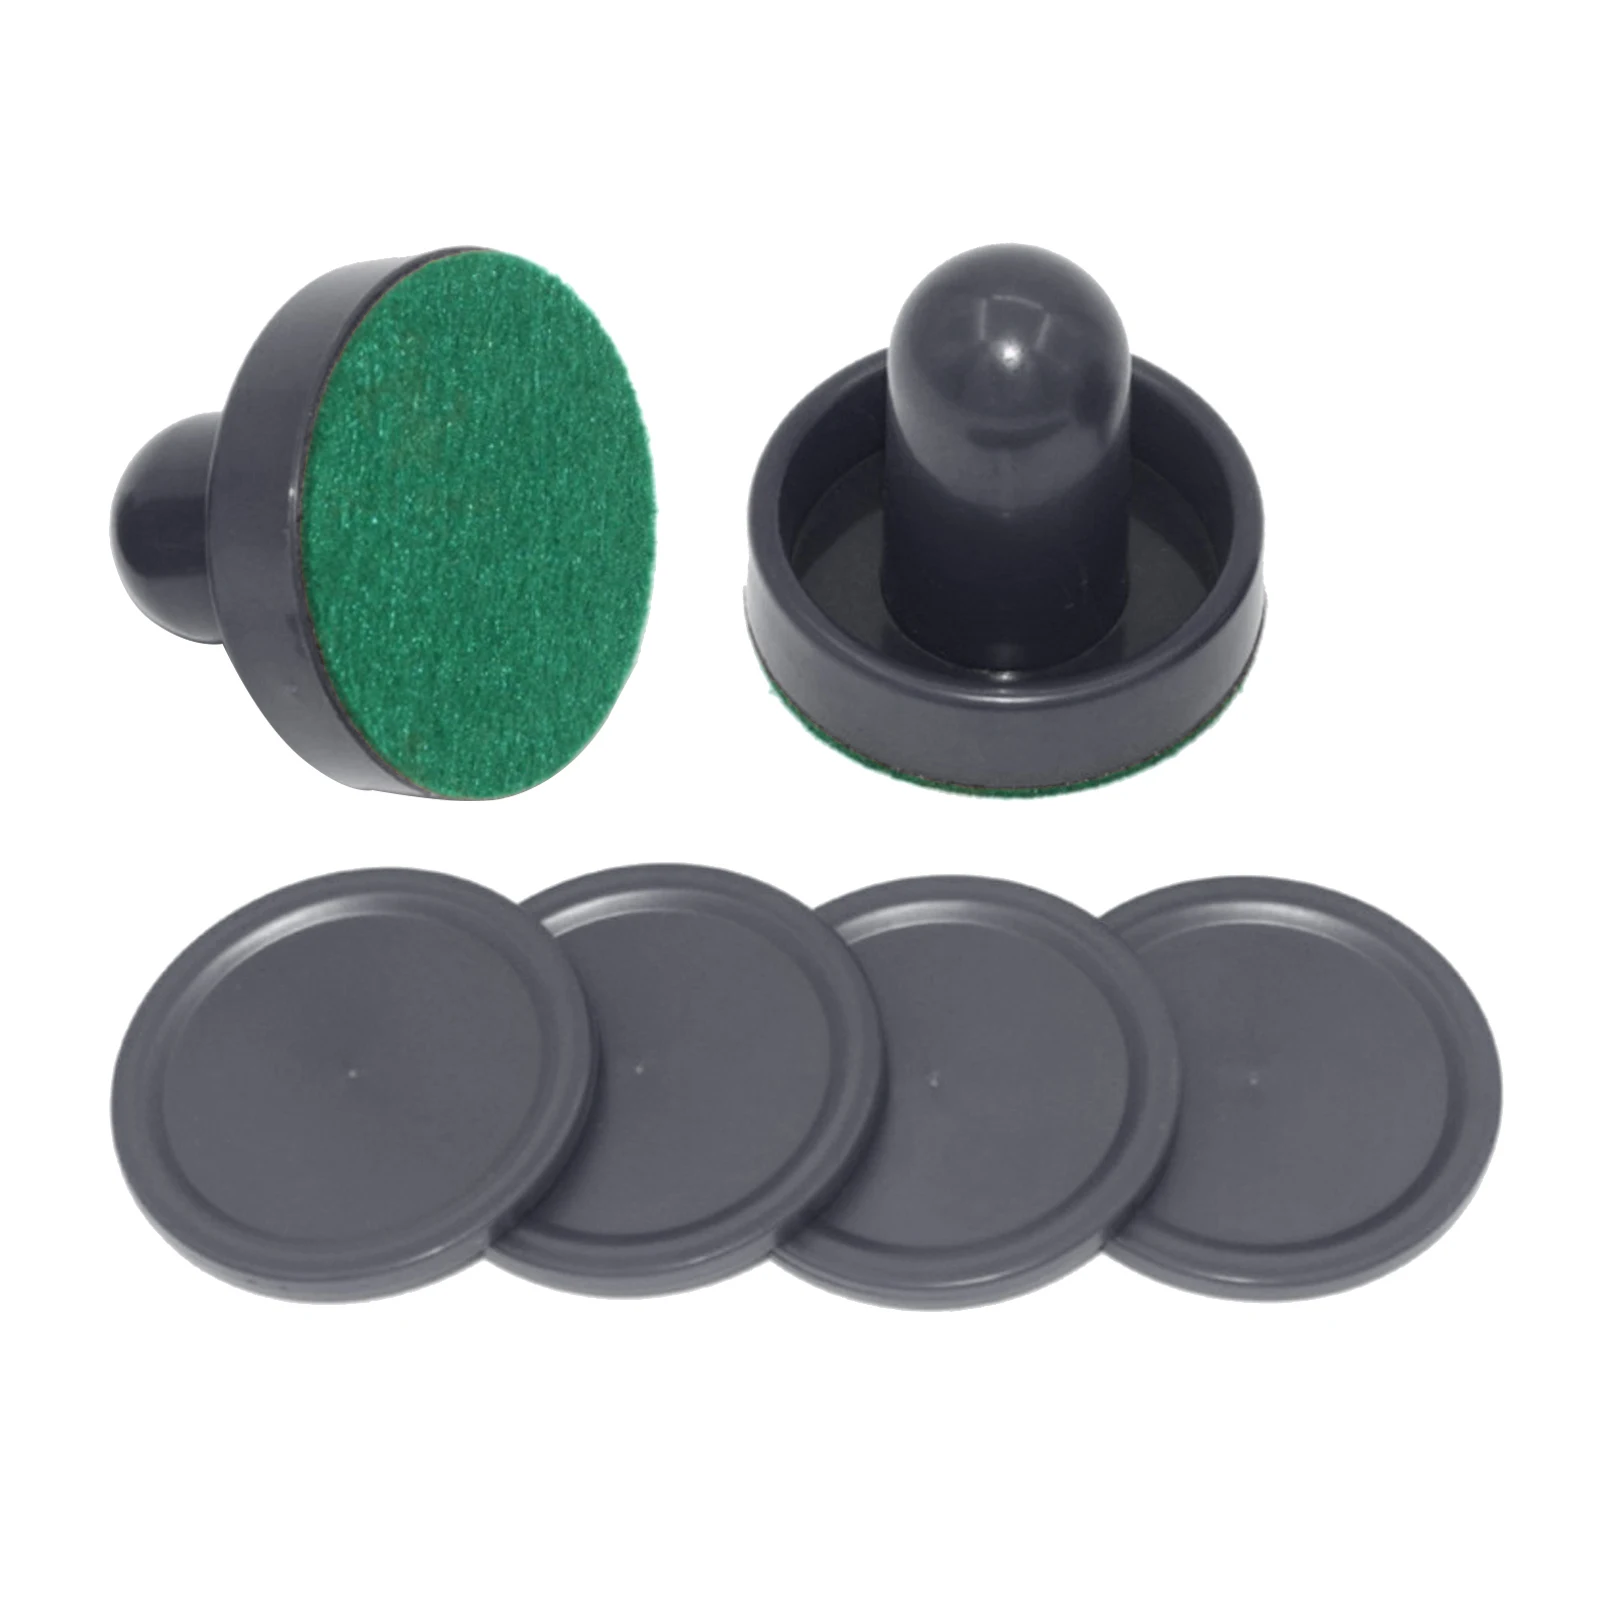 2PCS Plastic Air Hockey Pushers and 4PCS Pucks Replacement for Game Tables Black